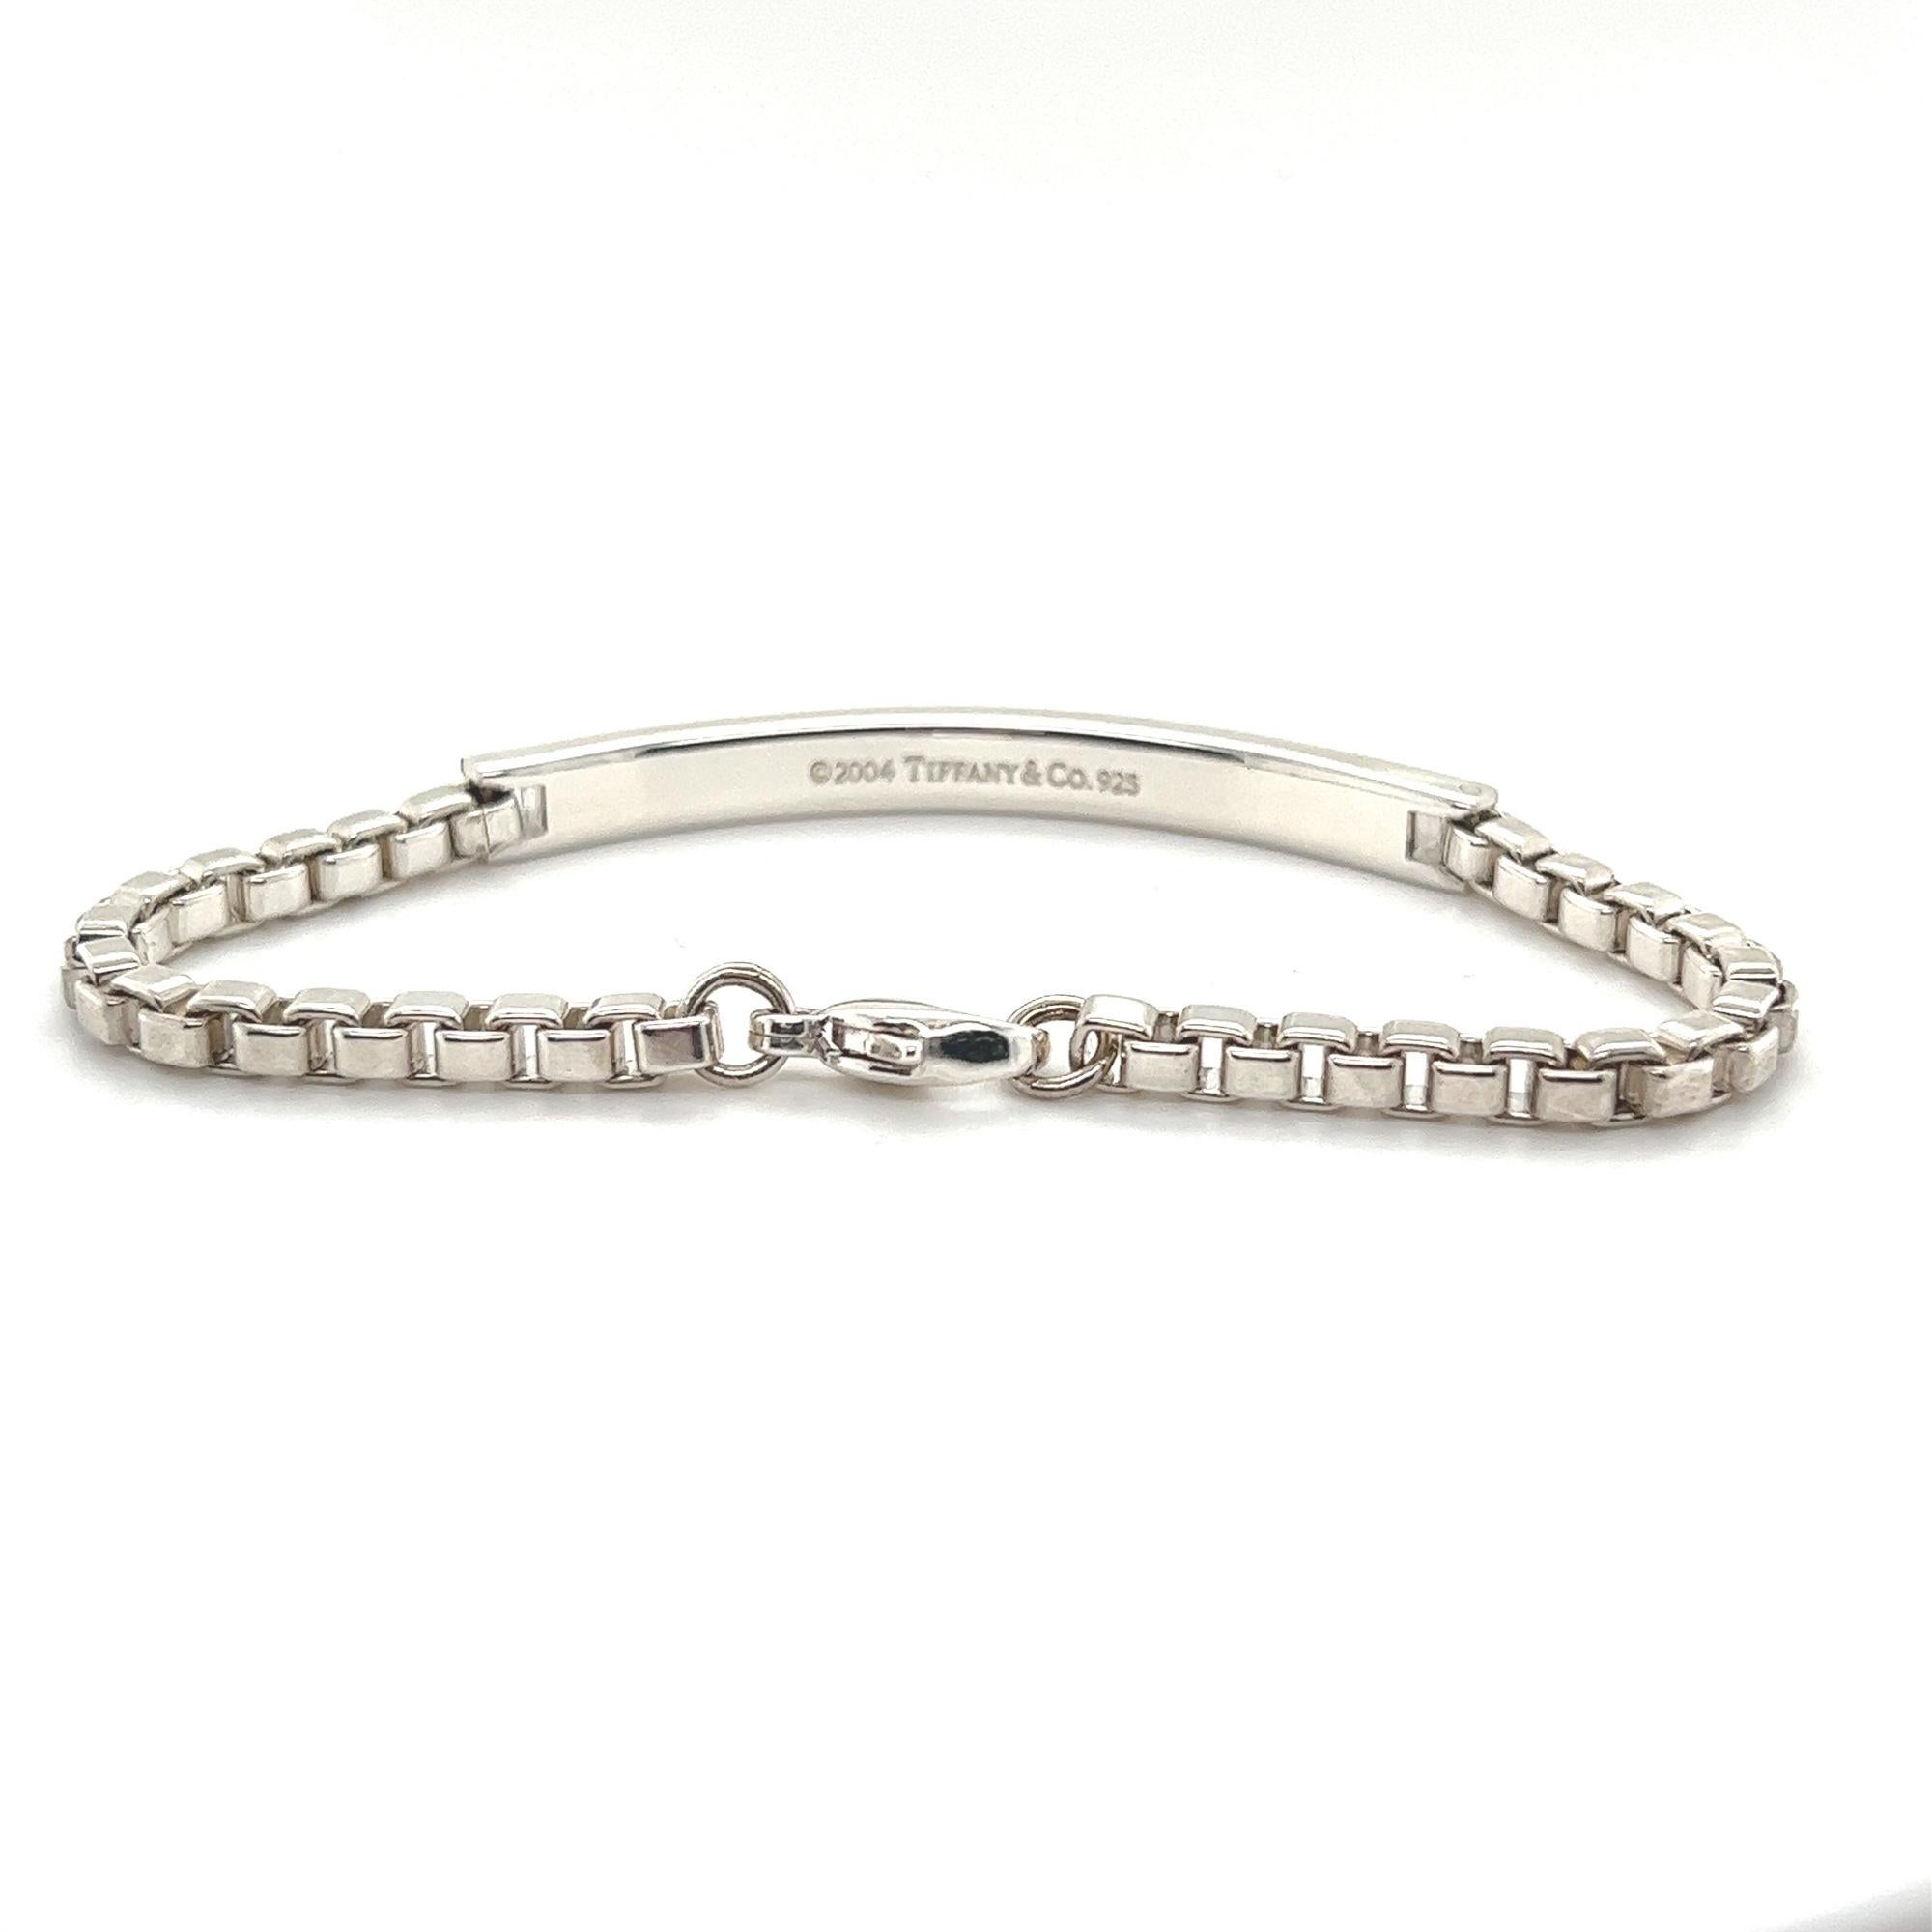 Inspired by ancient Roman arches, Tiffany & Co. Venetian link I.D. Men's bracelet is designed in sterling silver 925. This bracelet features stamped center bar with box links chain and lobster lock. Bracelet Length: 7.5 Inches, Width: 5.4mm. No box